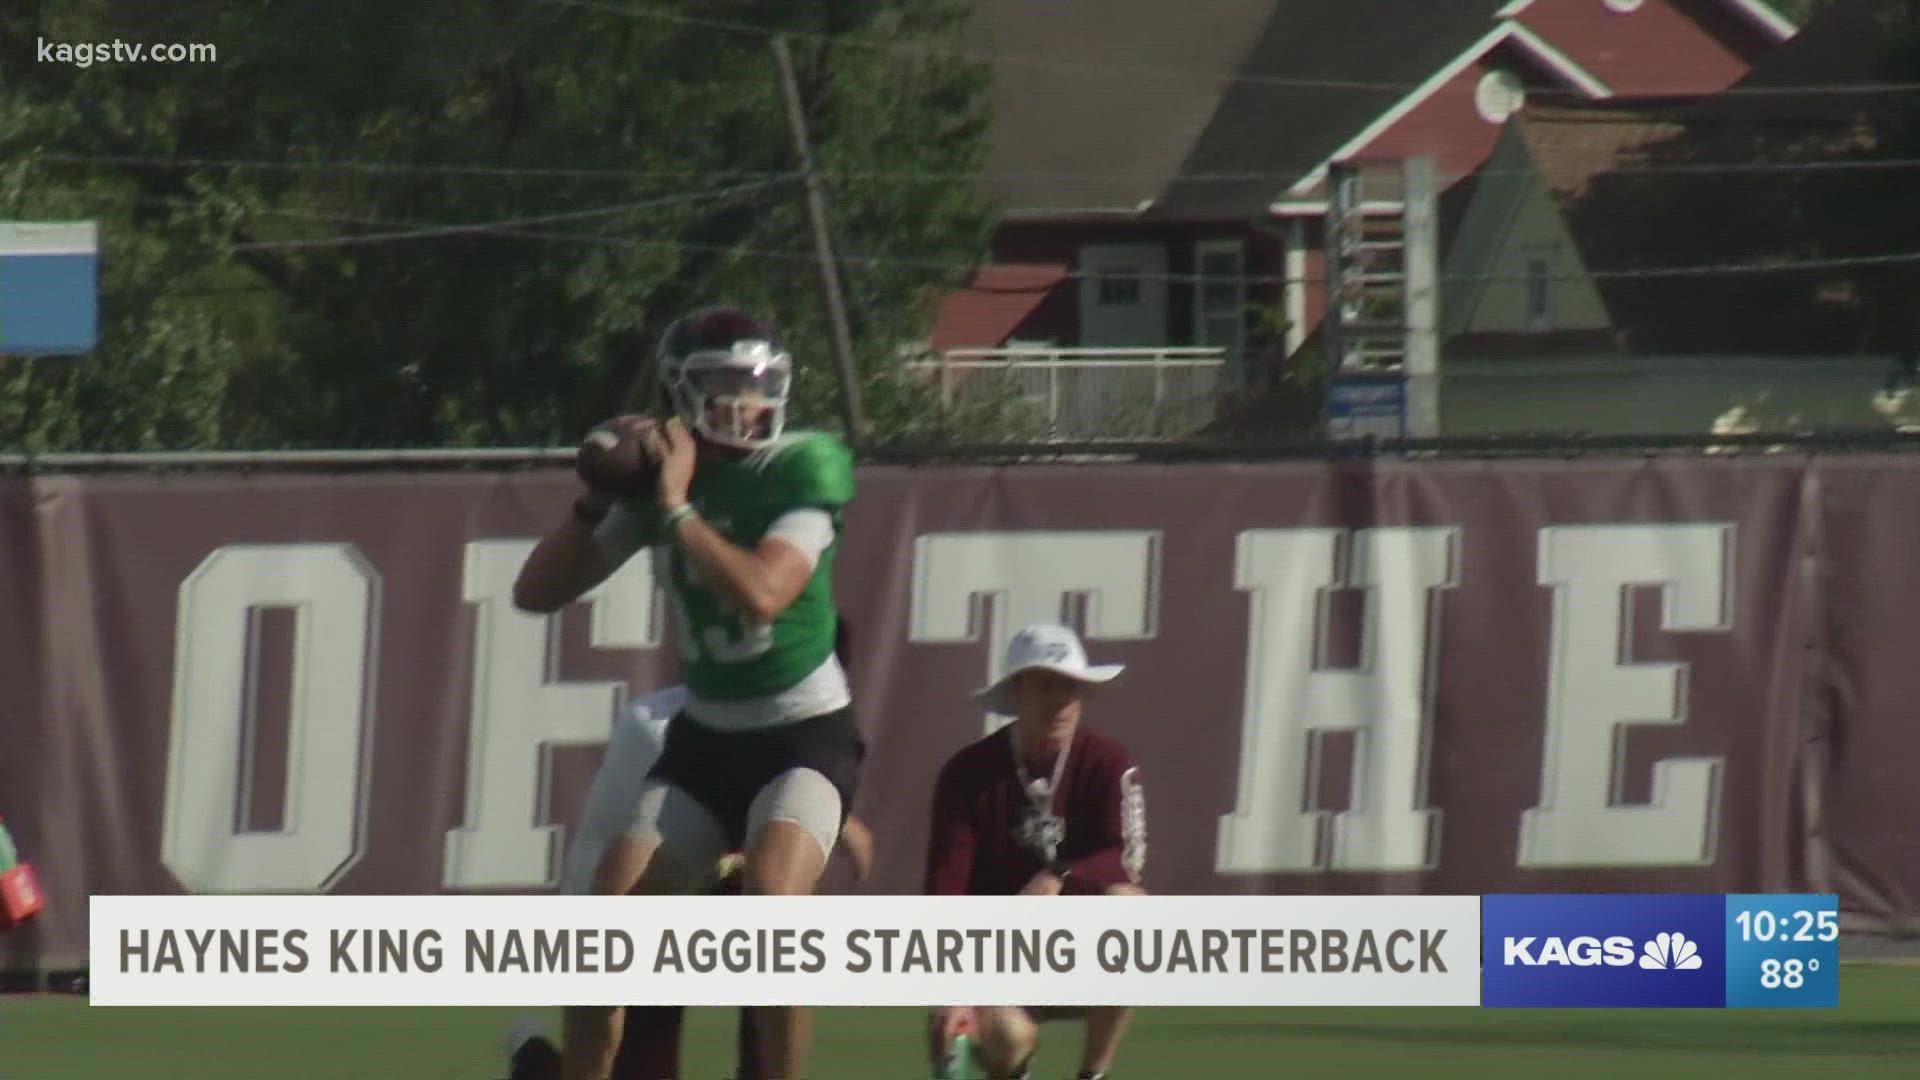 A week and a half before the season opener, Texas A&M football coach Jimbo Fisher has announced Haynes King as the starting quarterback.